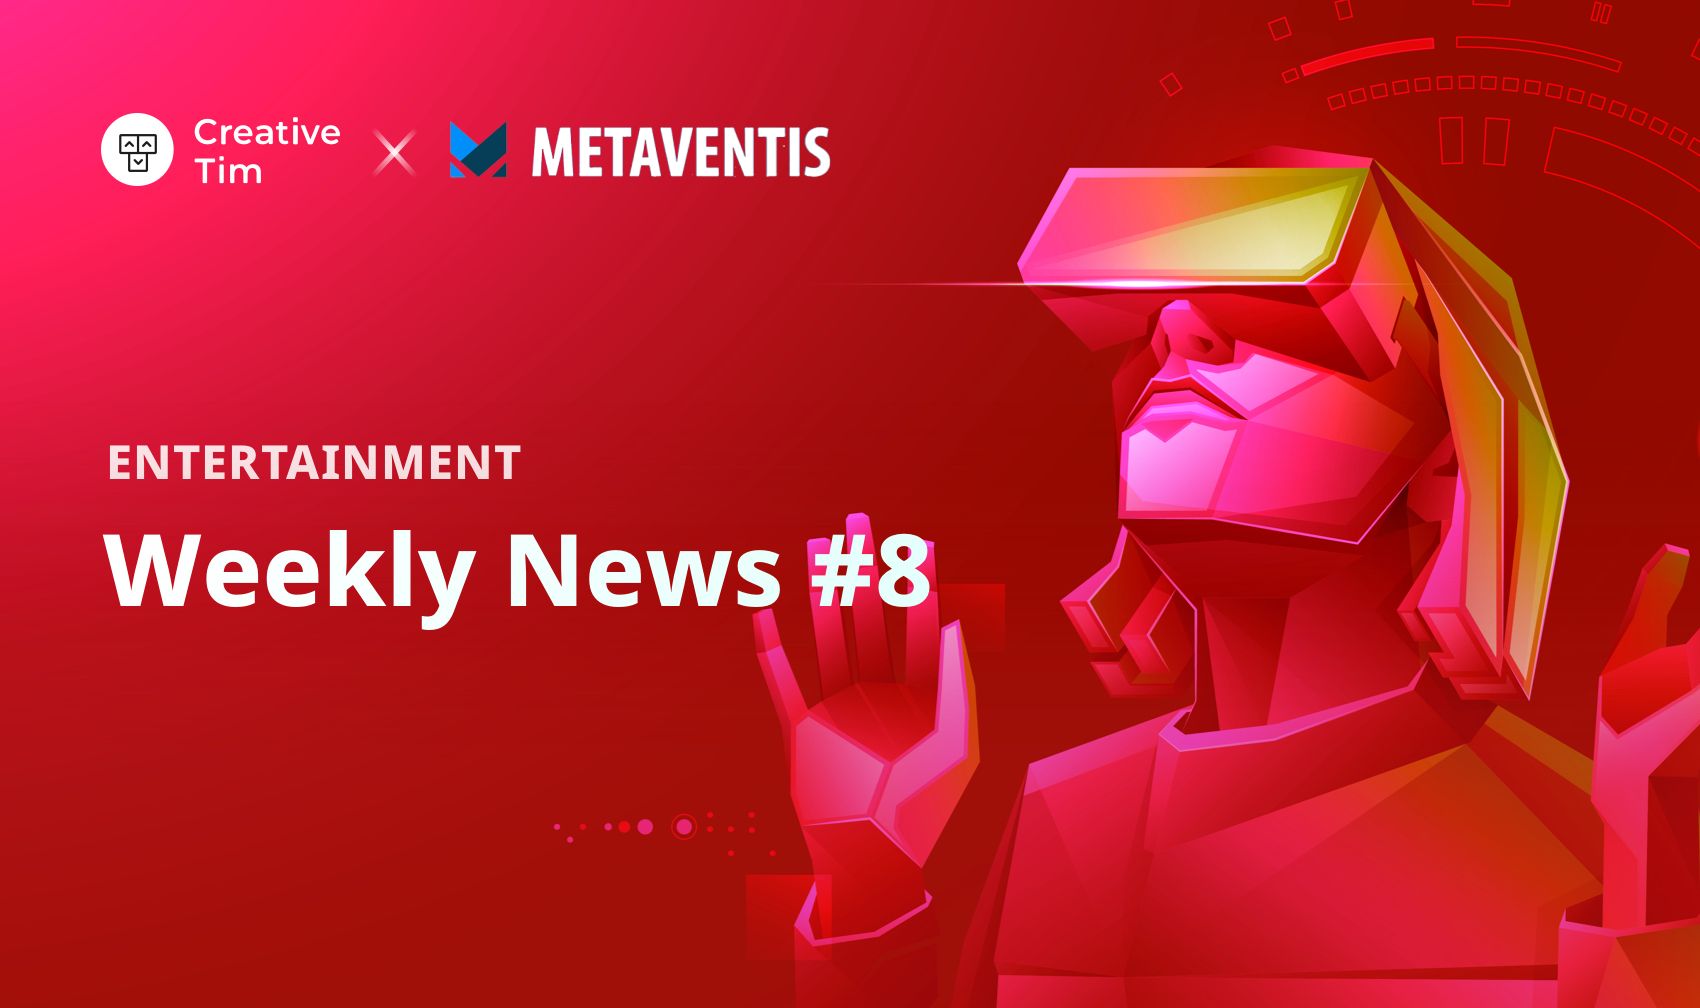 NFTs Weekly News #8 - Entertainment: eBay plans to hire Web 3 Staff